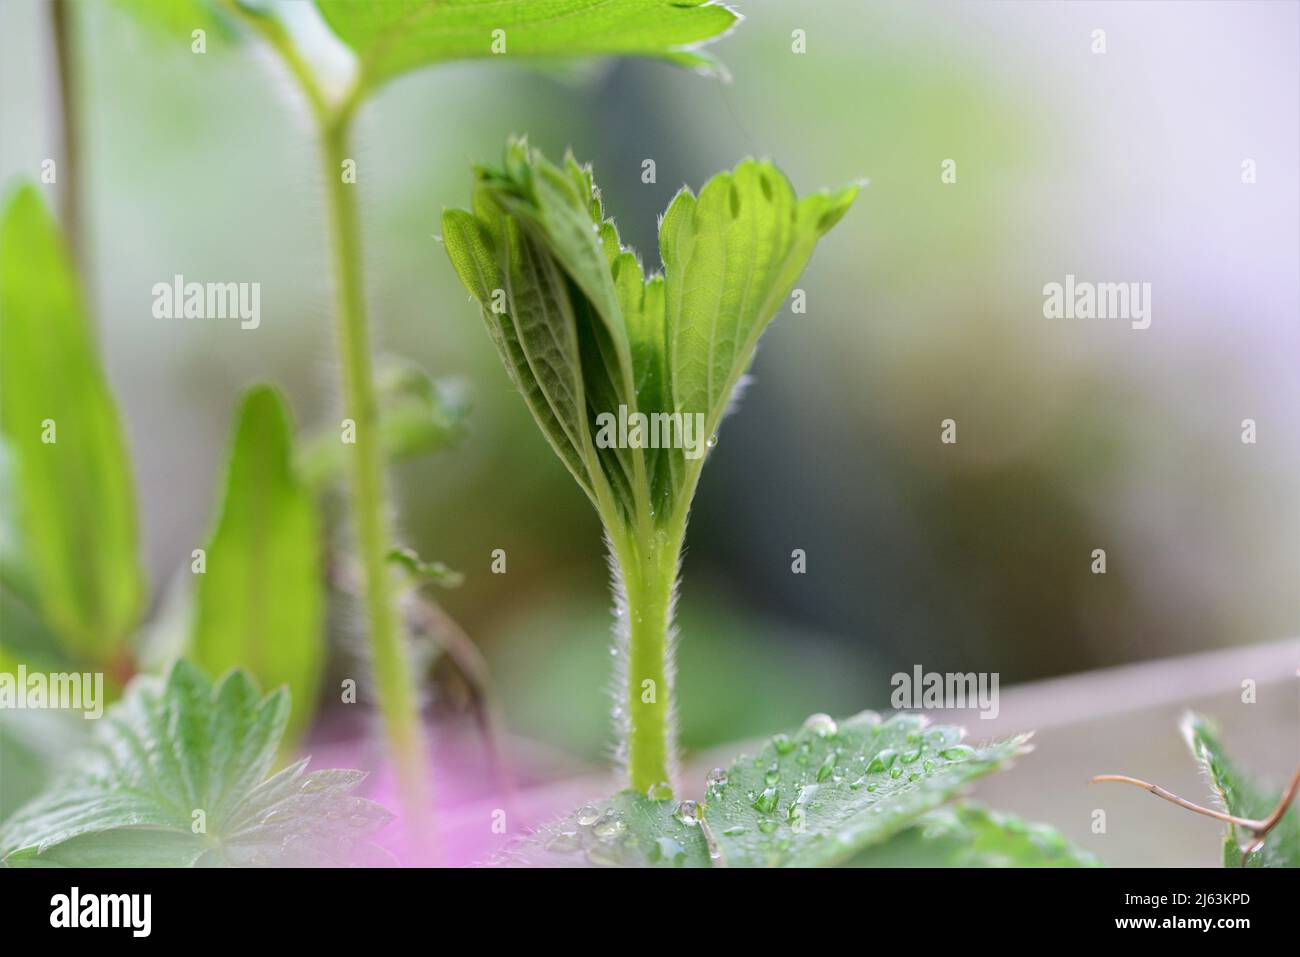 Green wet growing strawberryleaf after rain Stock Photo